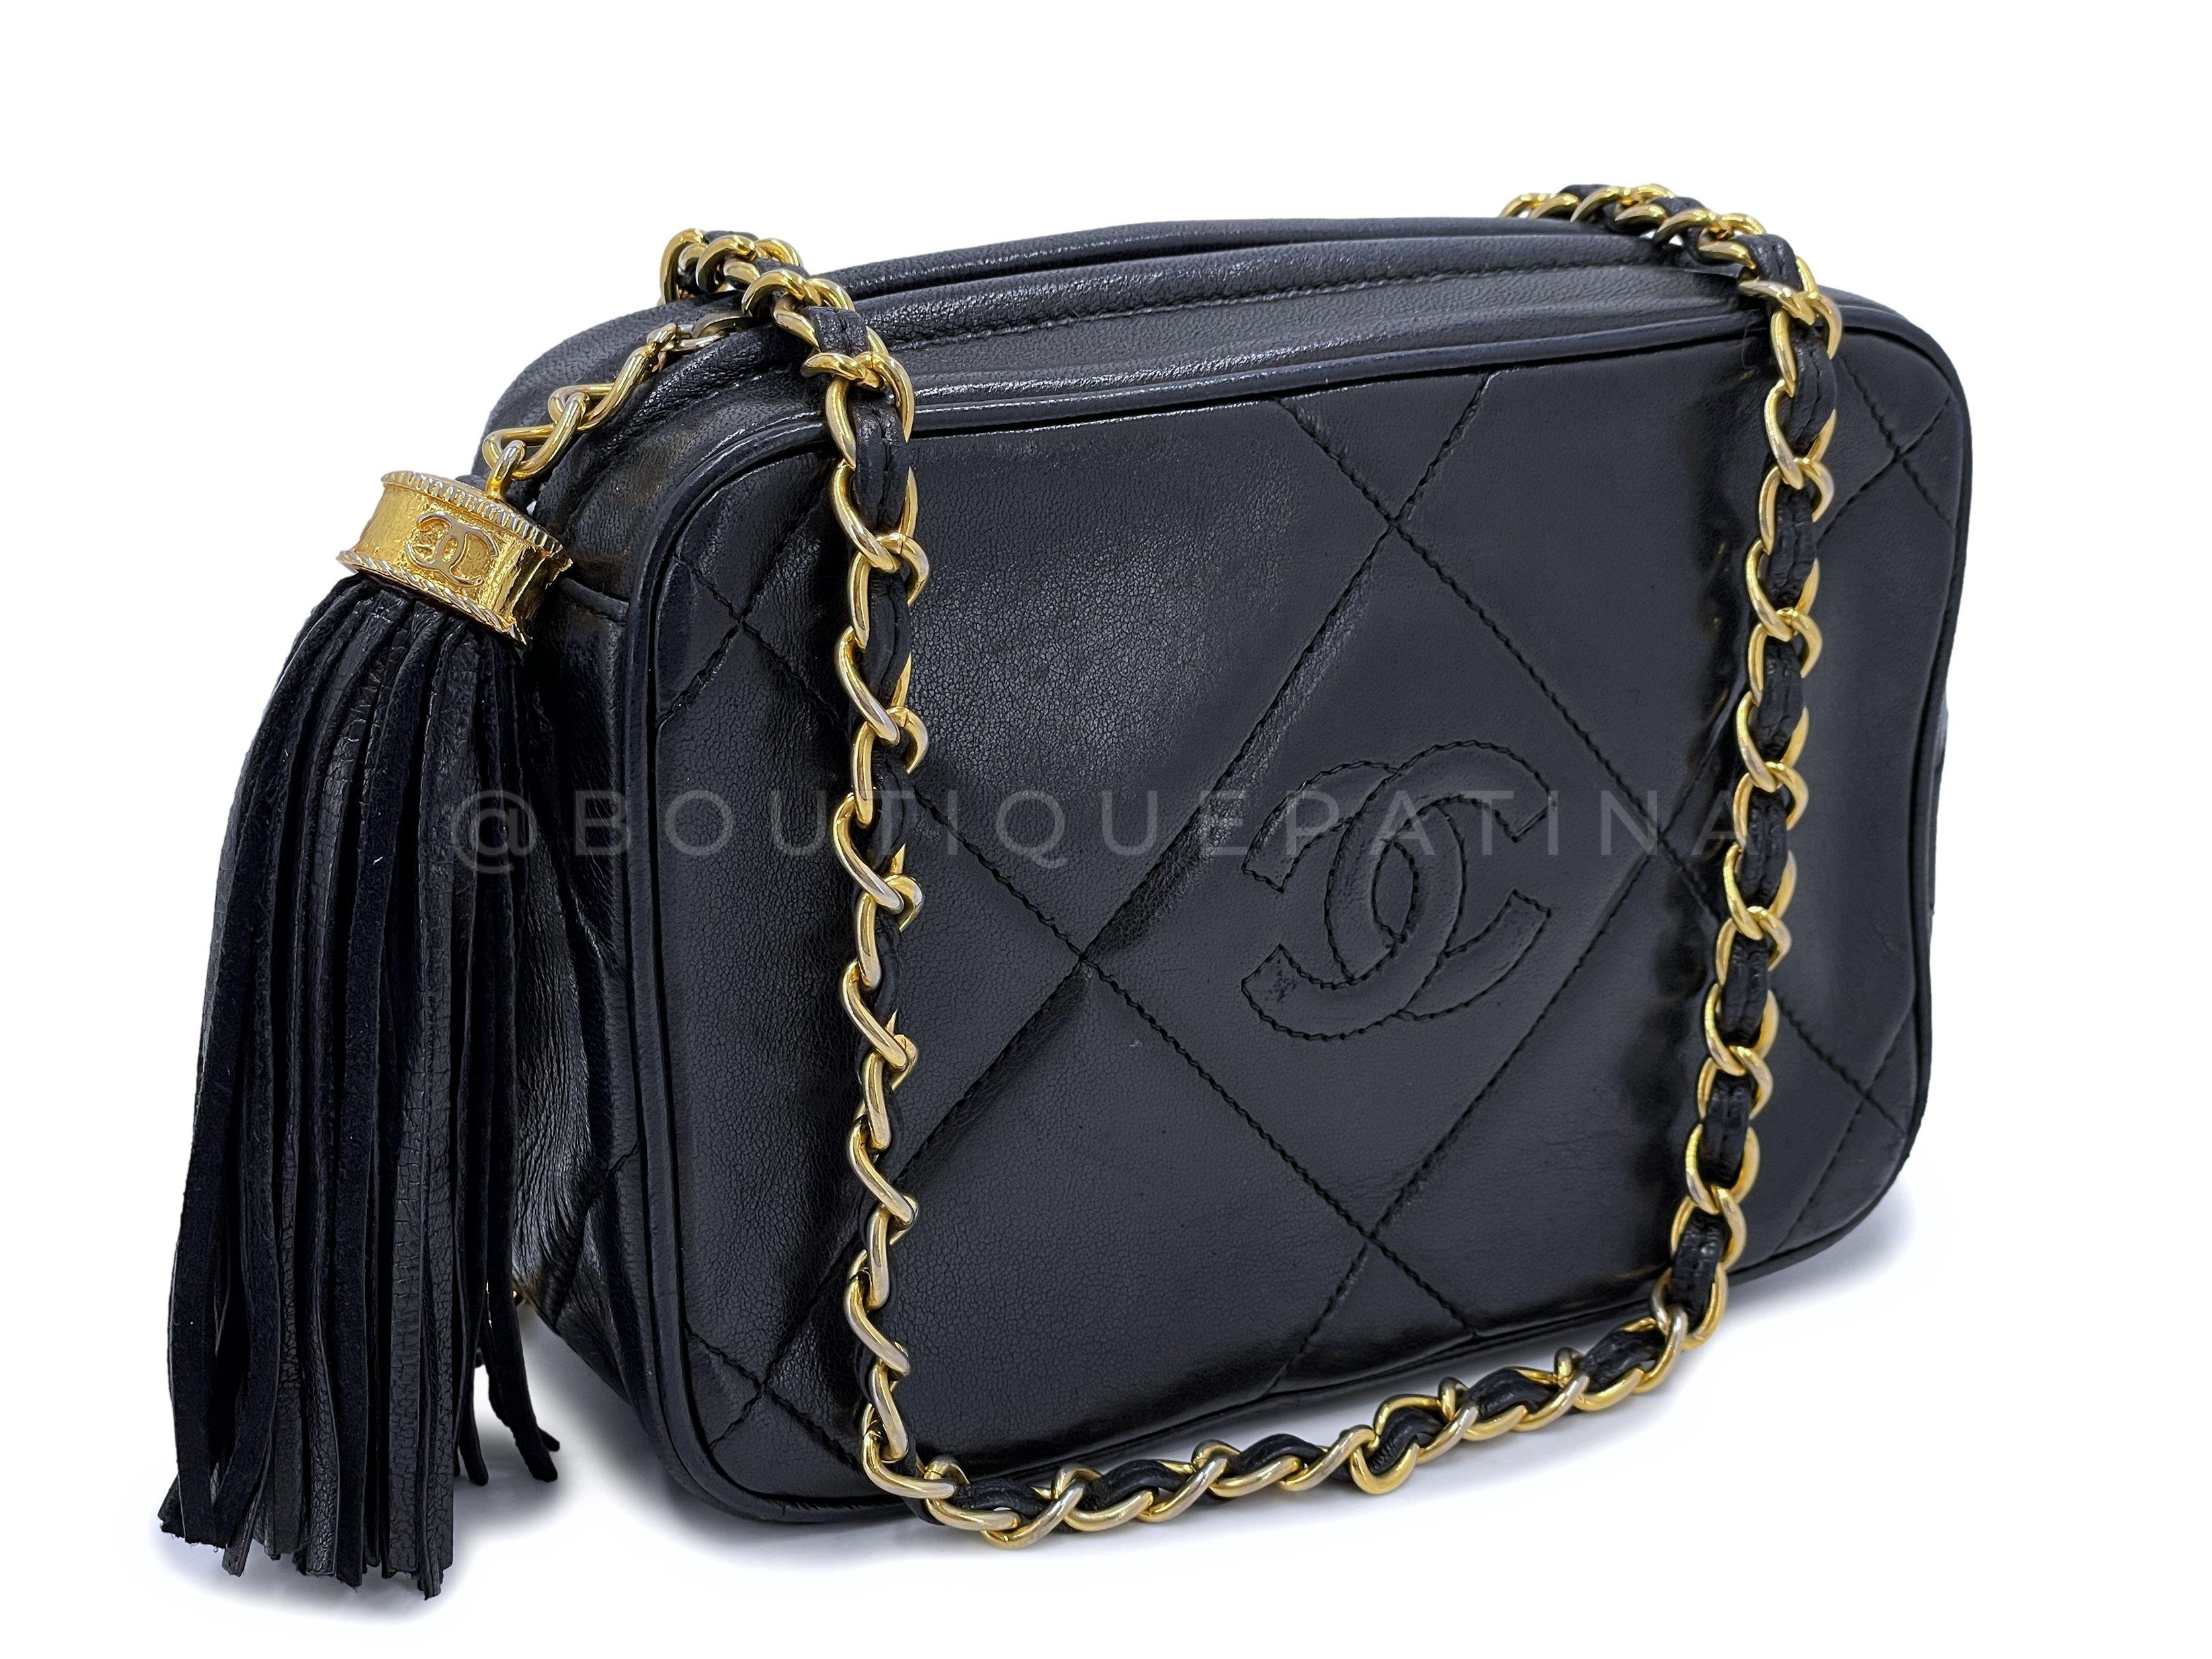 Store item: 66971
Established 19 years ago, Boutique Patina has specialized in sourcing and curating the best condition preowned vintage Chanel leather treasures by searching closets around the world. 

This is a vintage classic. A 0 million series